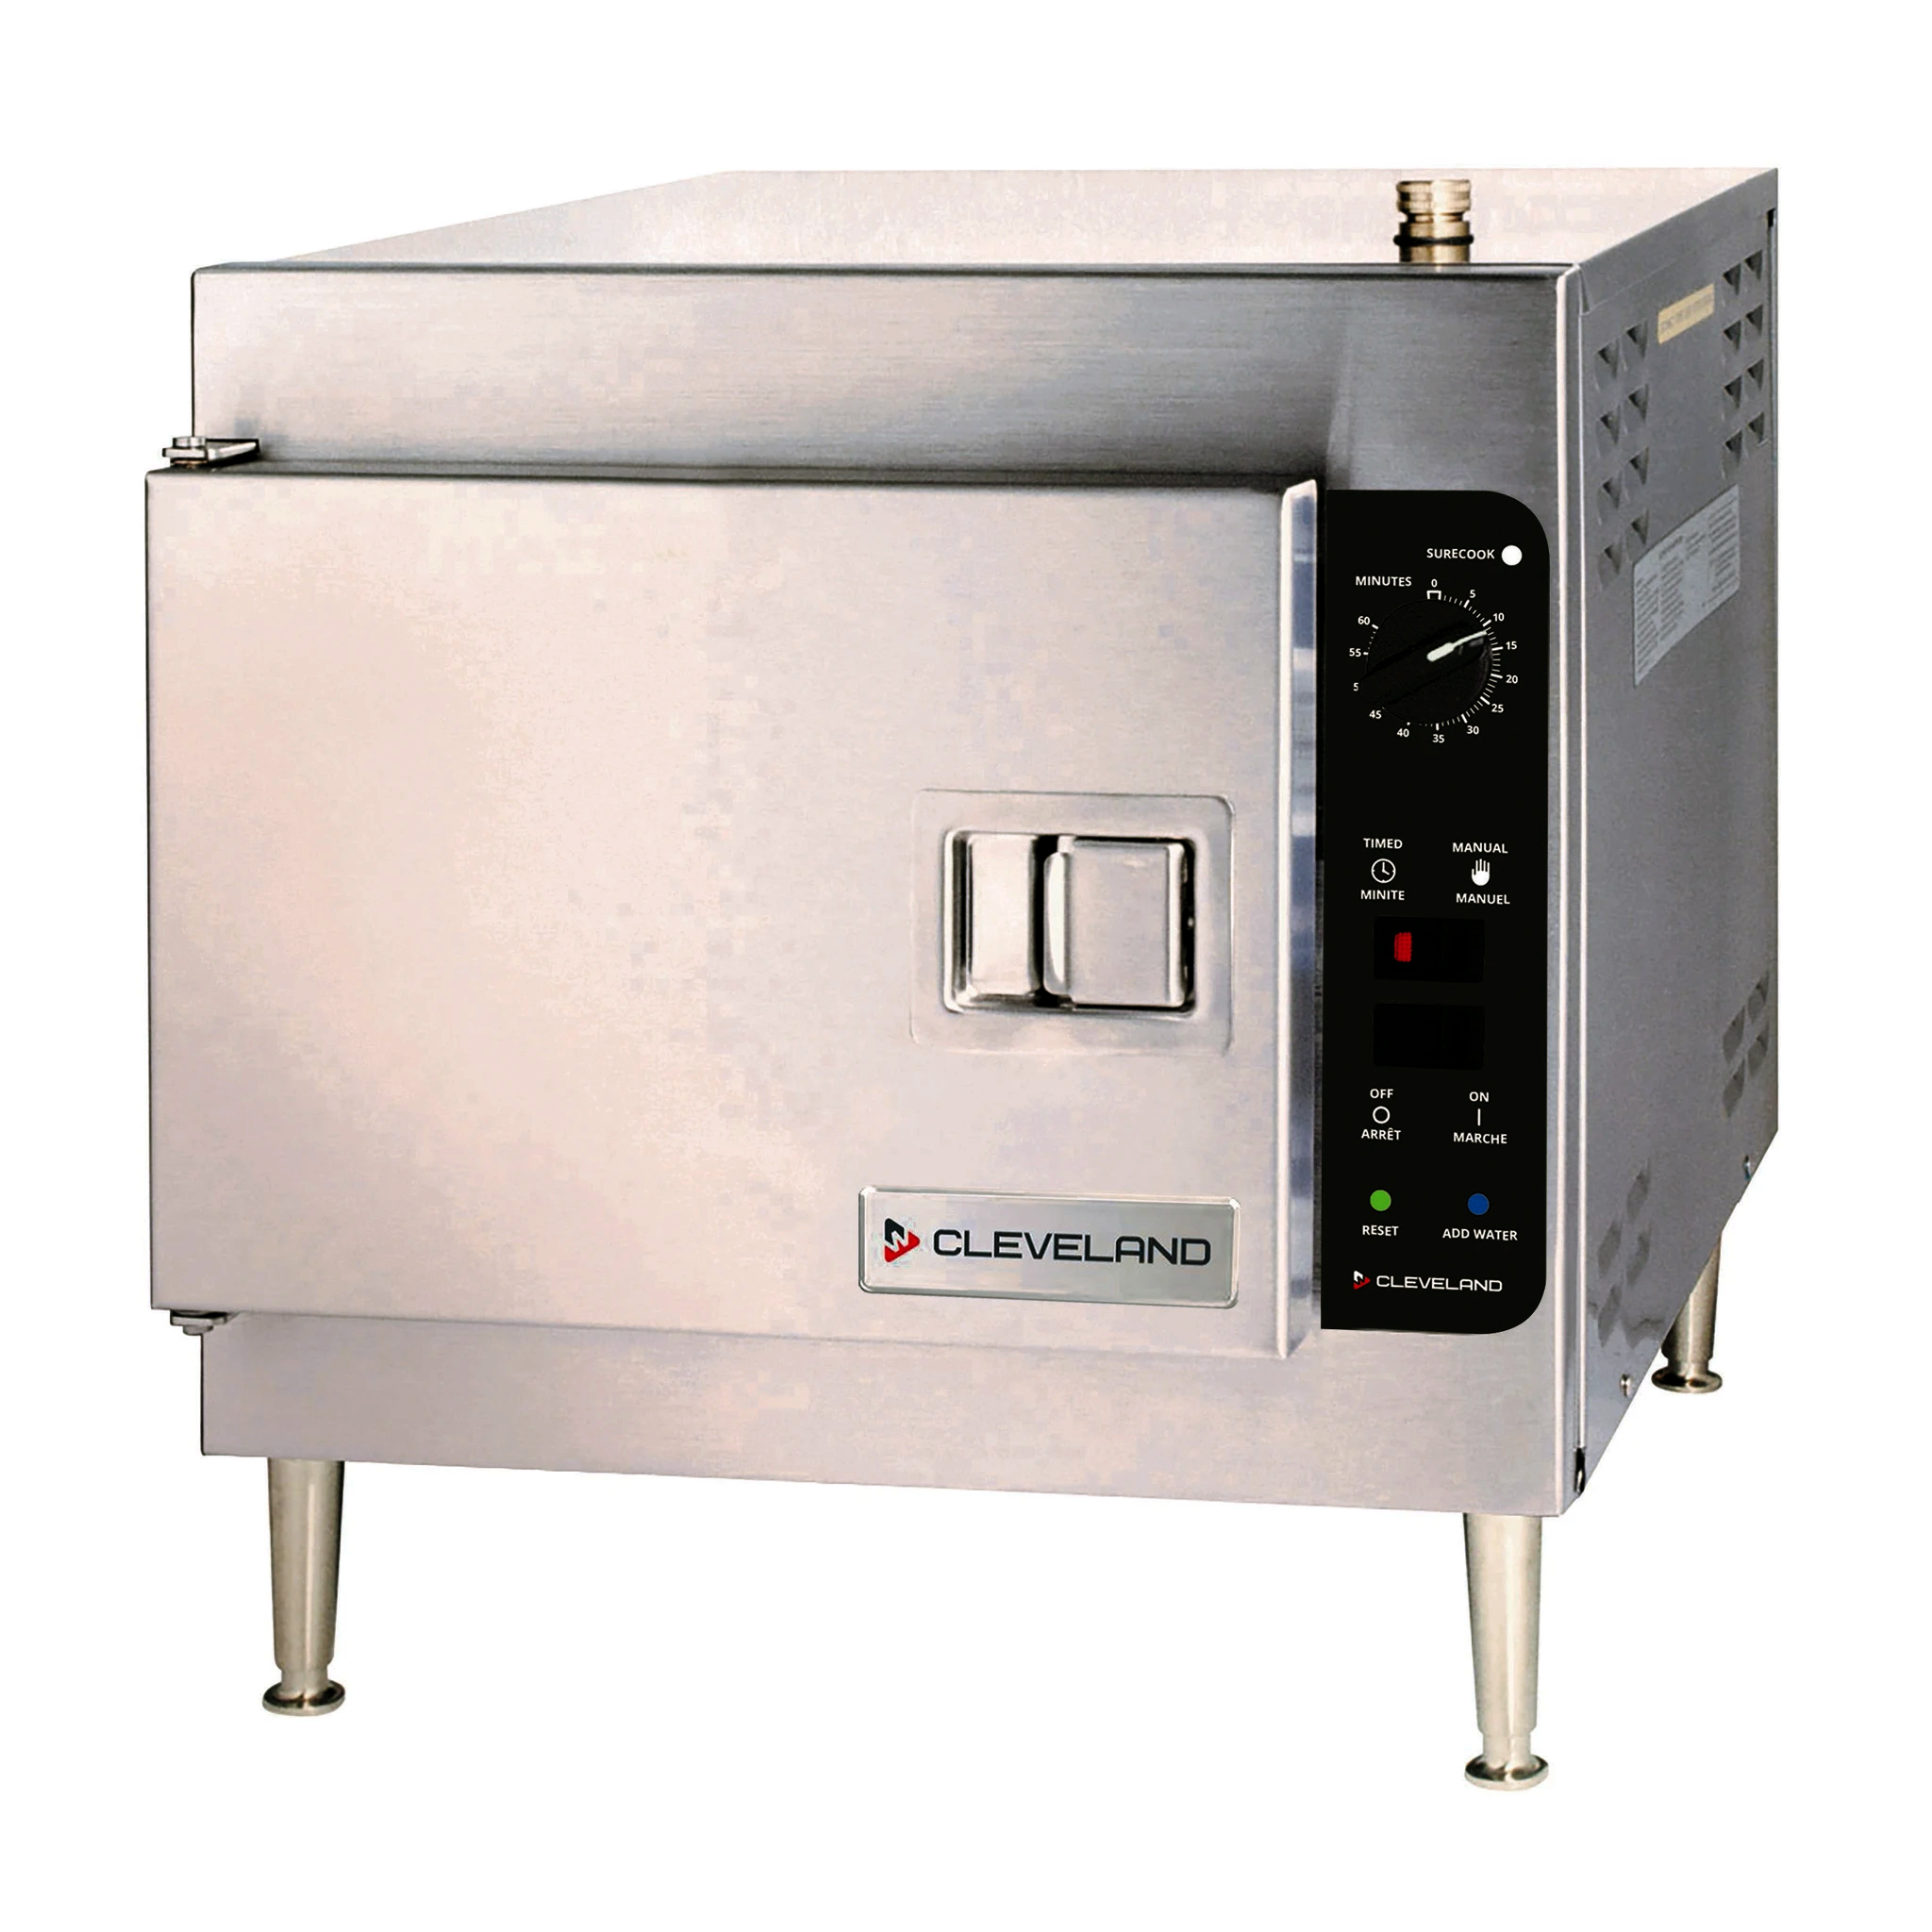 Standard features of the Cleveland 21CET8@2081QS countertop convection steamer